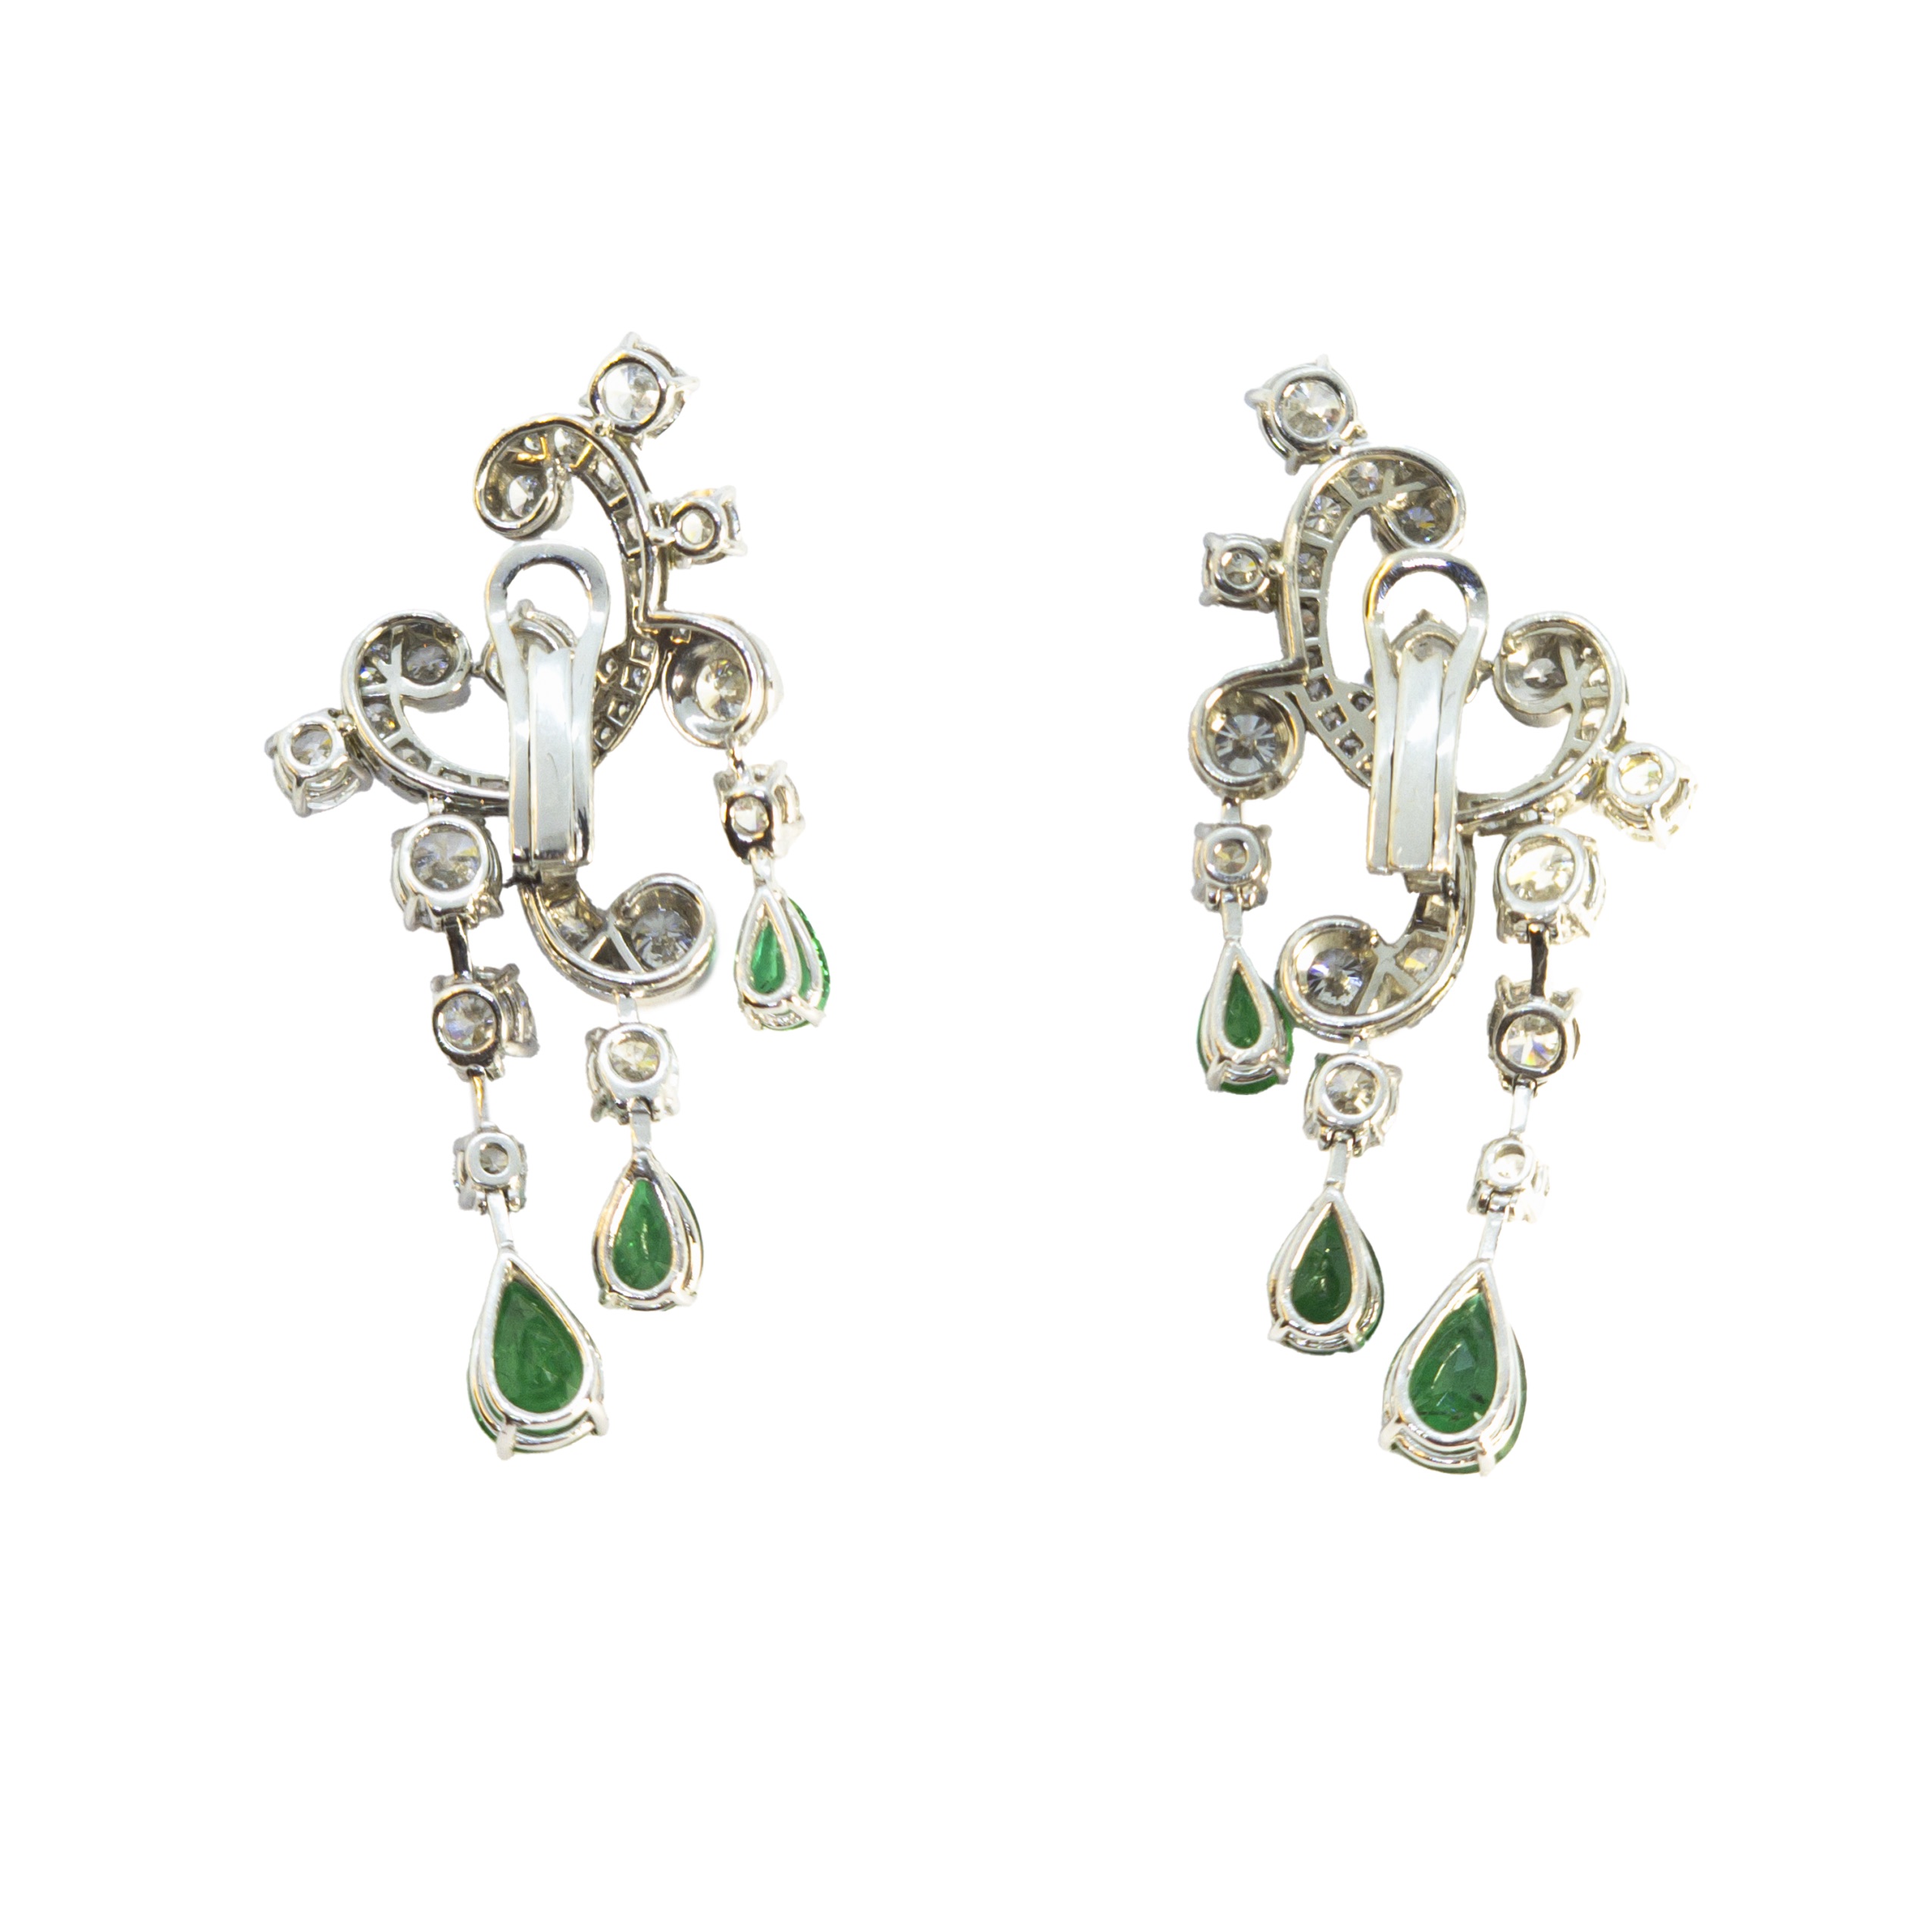 European, Circa 1980, A fine and attractive pair of diamond and emerald earrings - Image 2 of 2